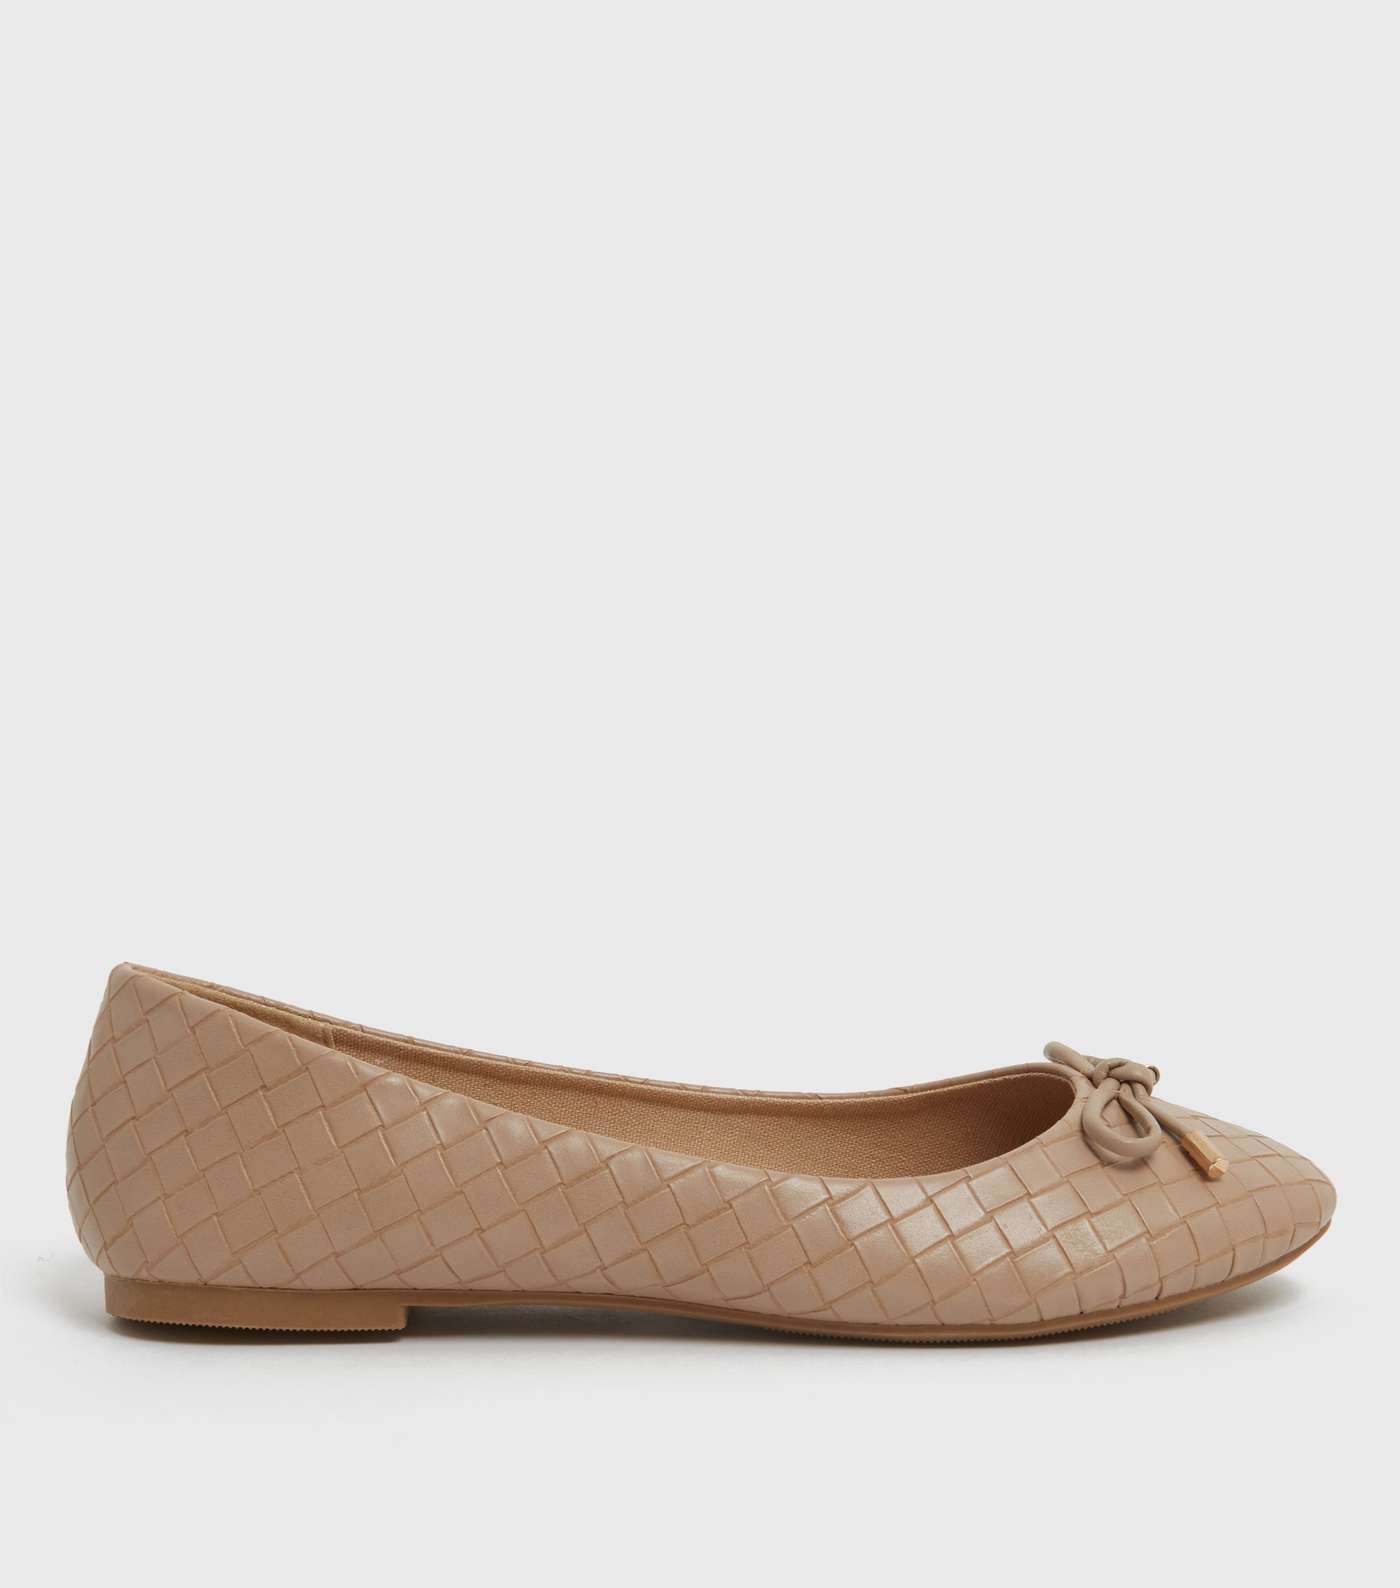 Stone Woven Leather-Look Bow Ballet Pumps